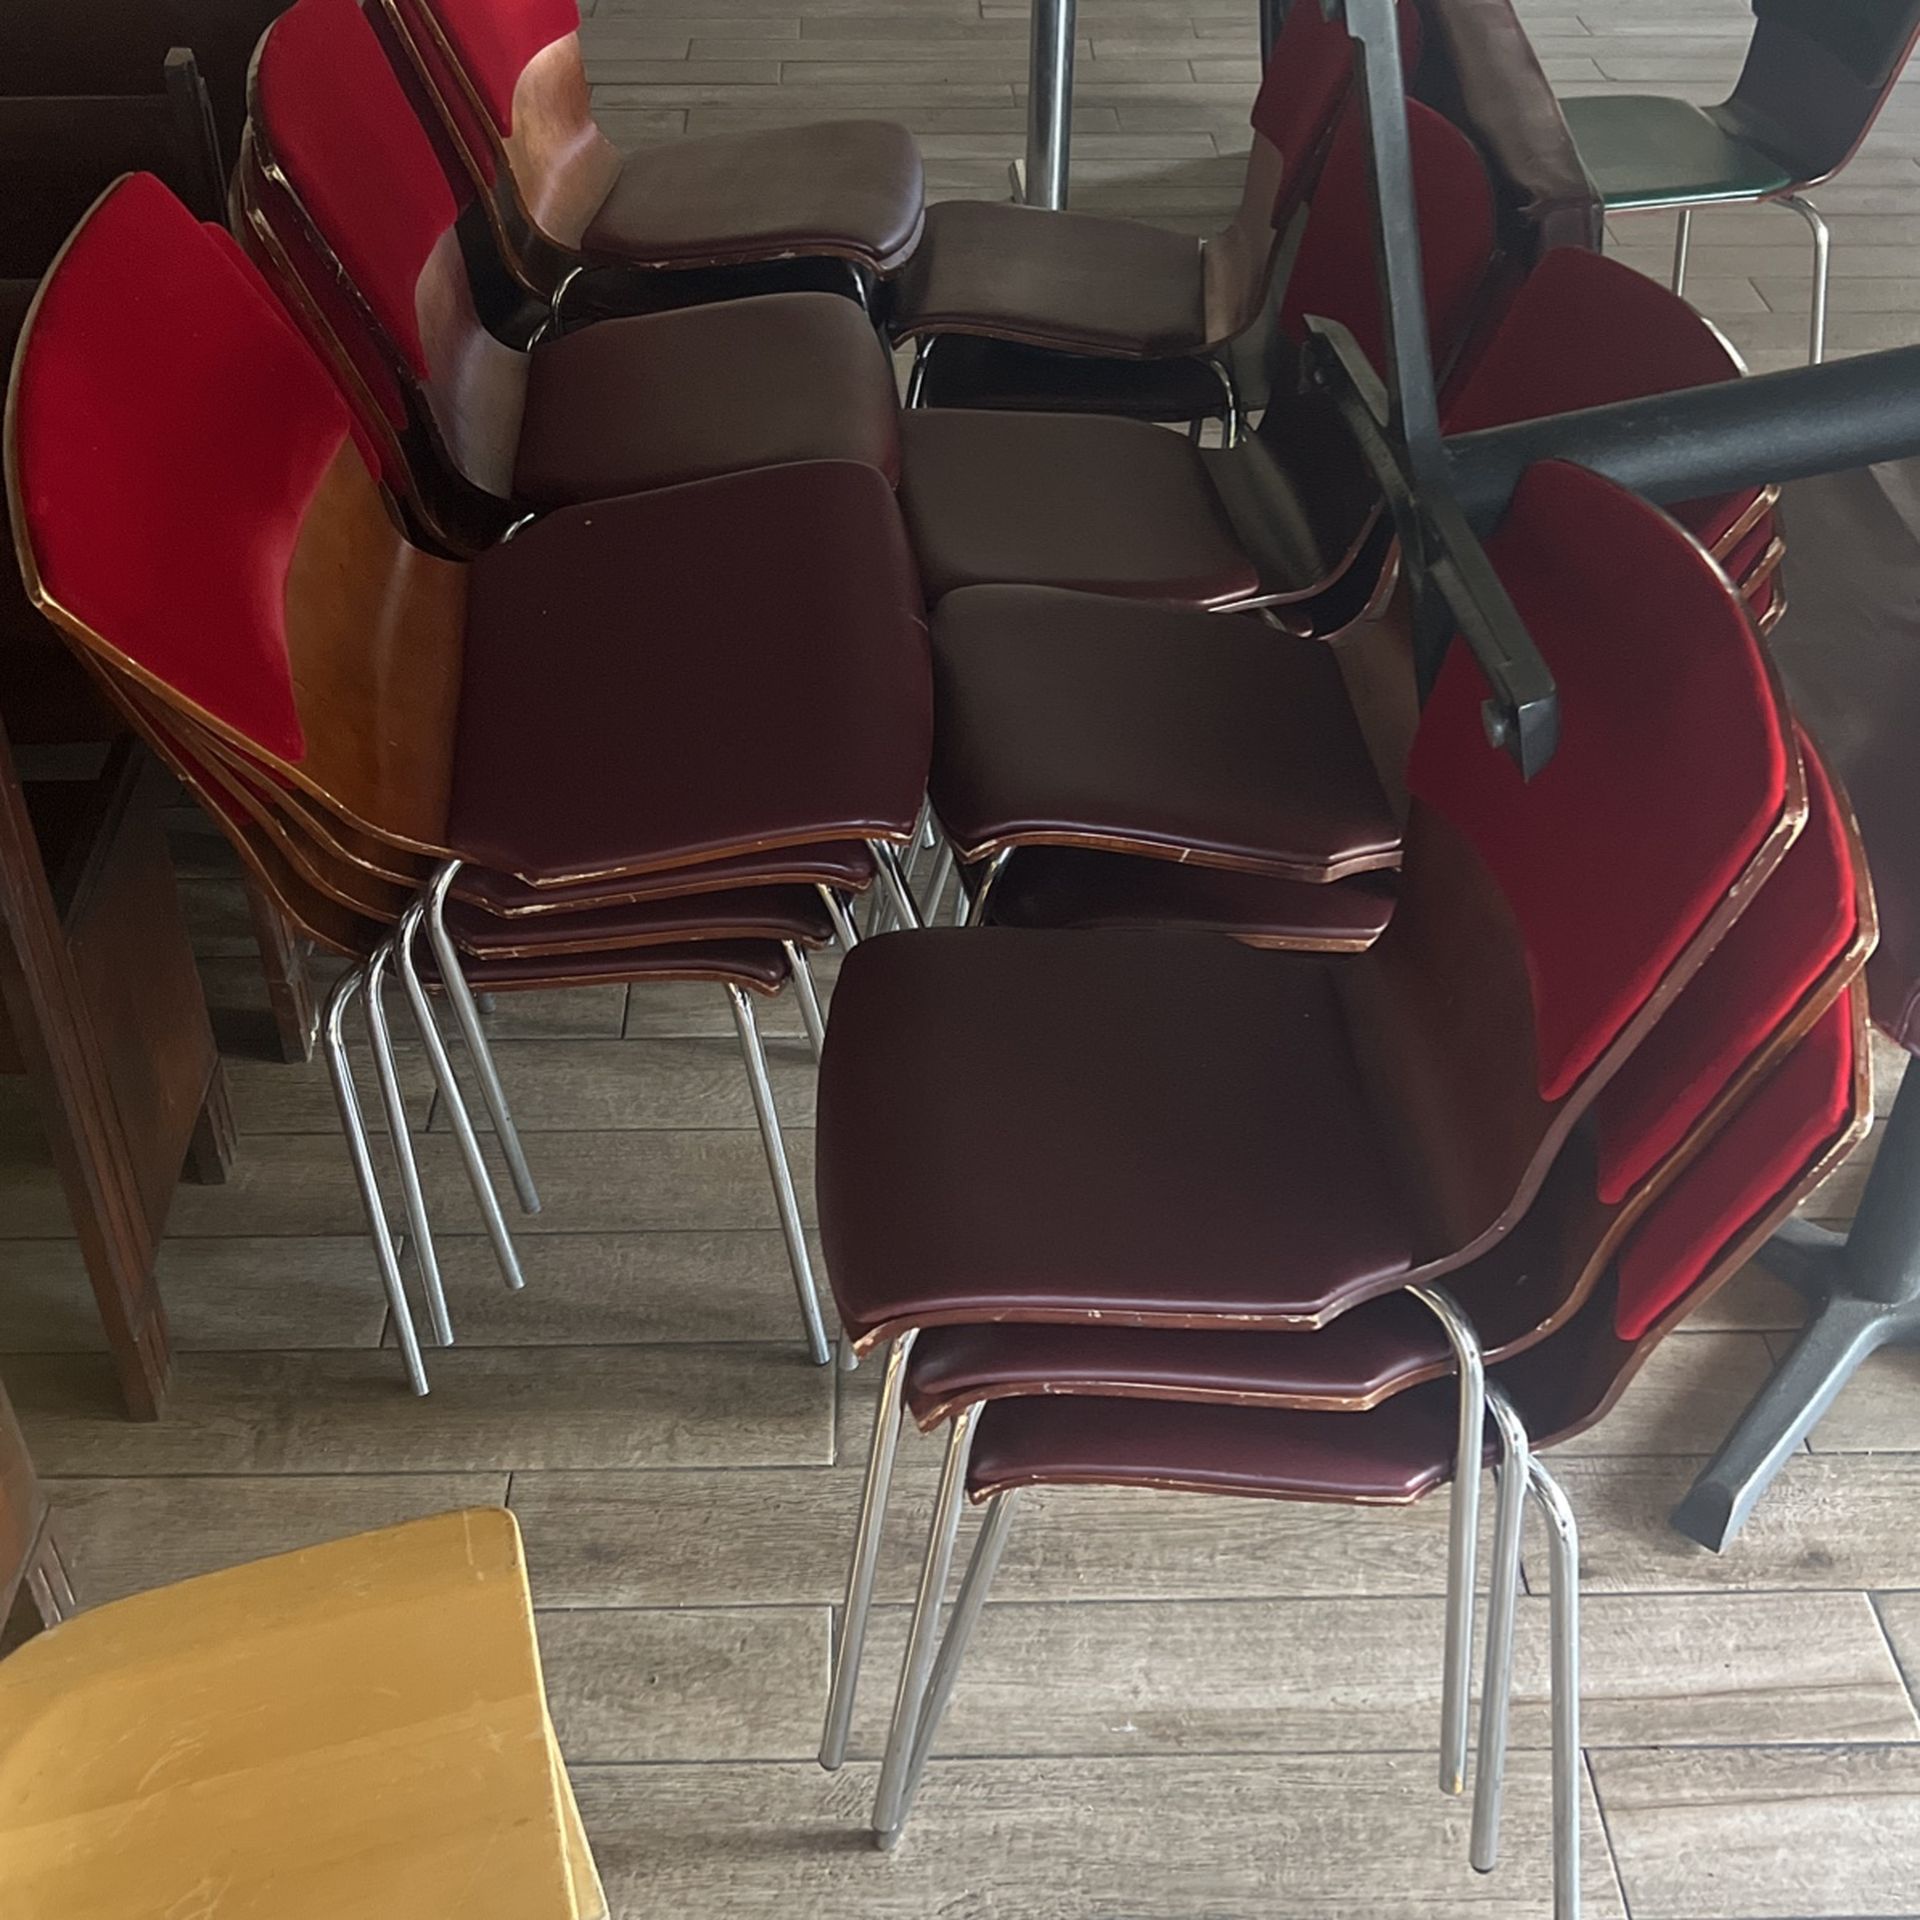 Restaurant Chairs, Benches,  And Locker